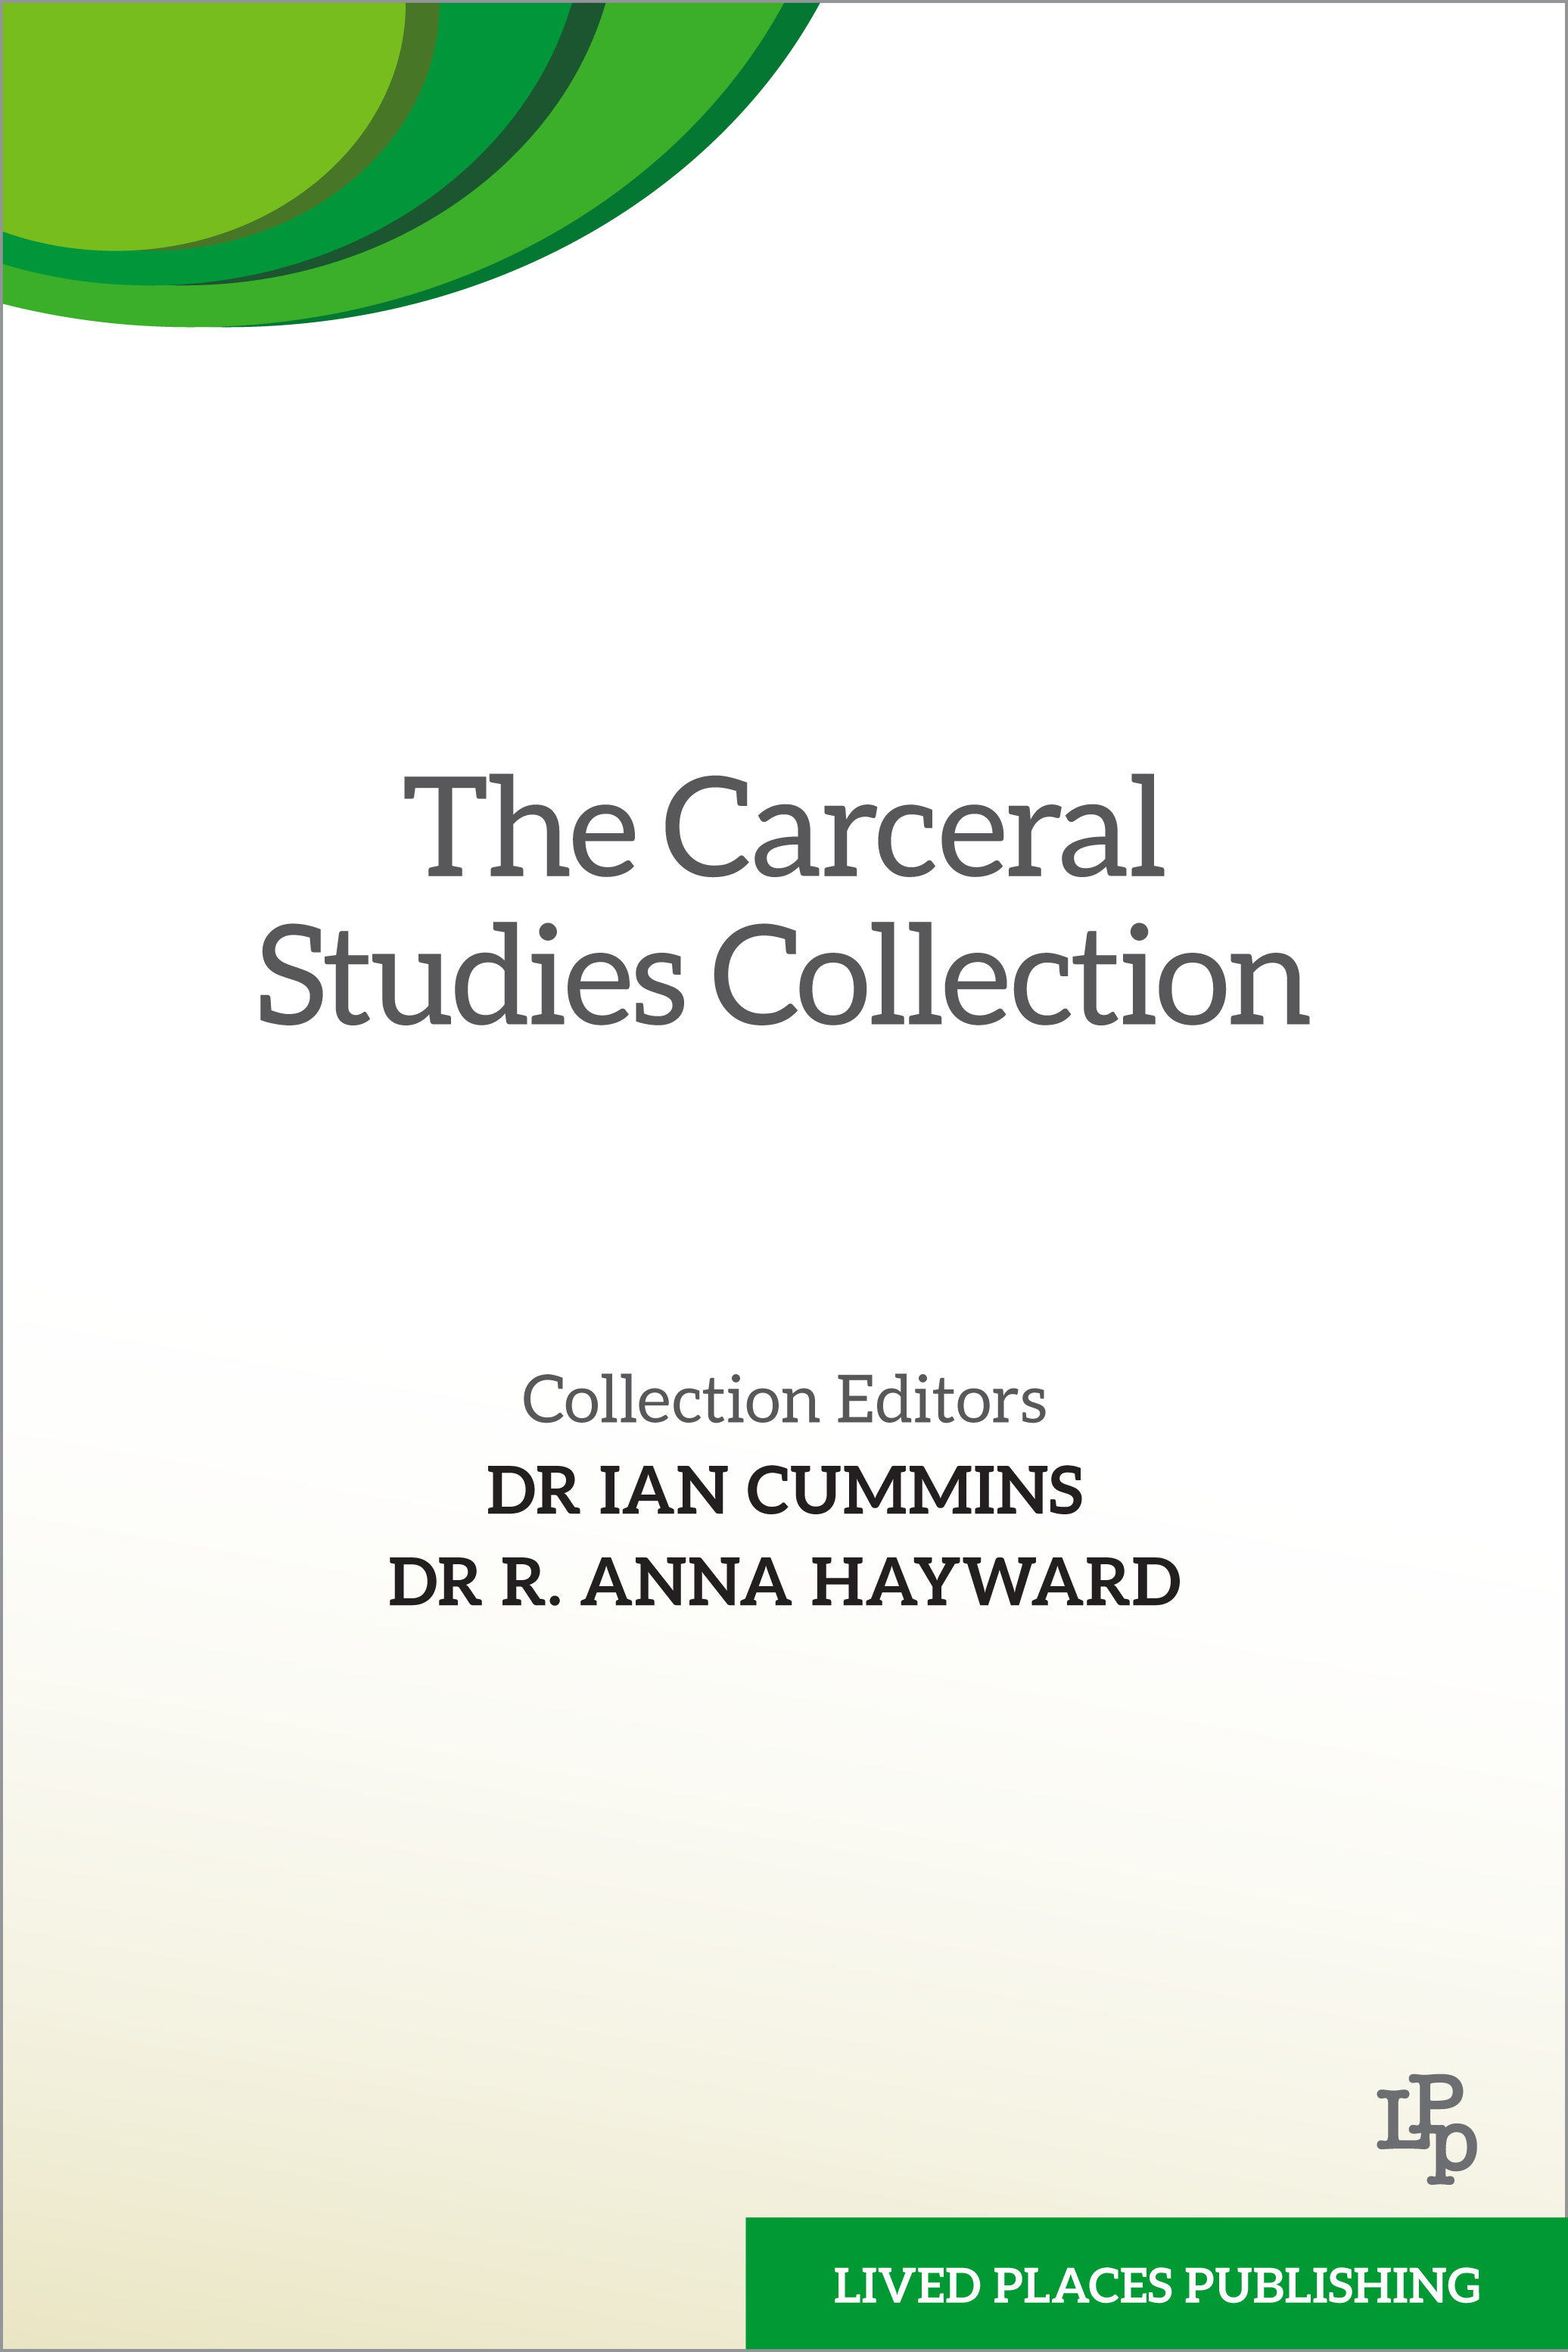 The Carceral Studies Collection. Published by Lived Places Publishing. Collection editors Dr Ian Cummins and Dr R. Anna Hayward. 